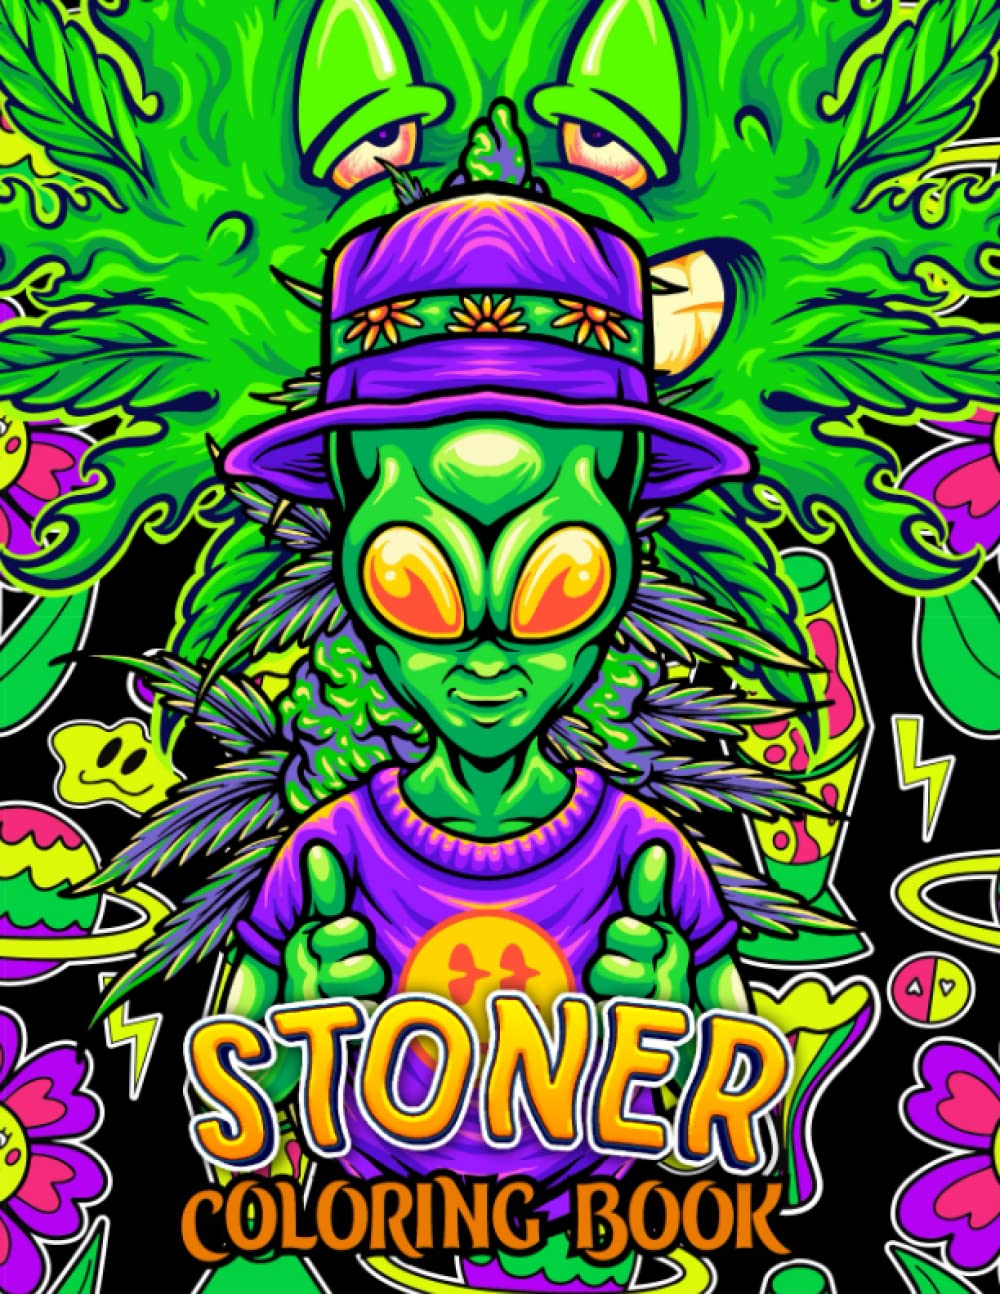 Princess Stoner Coloring Book: Excellent Coloring Book For Kids